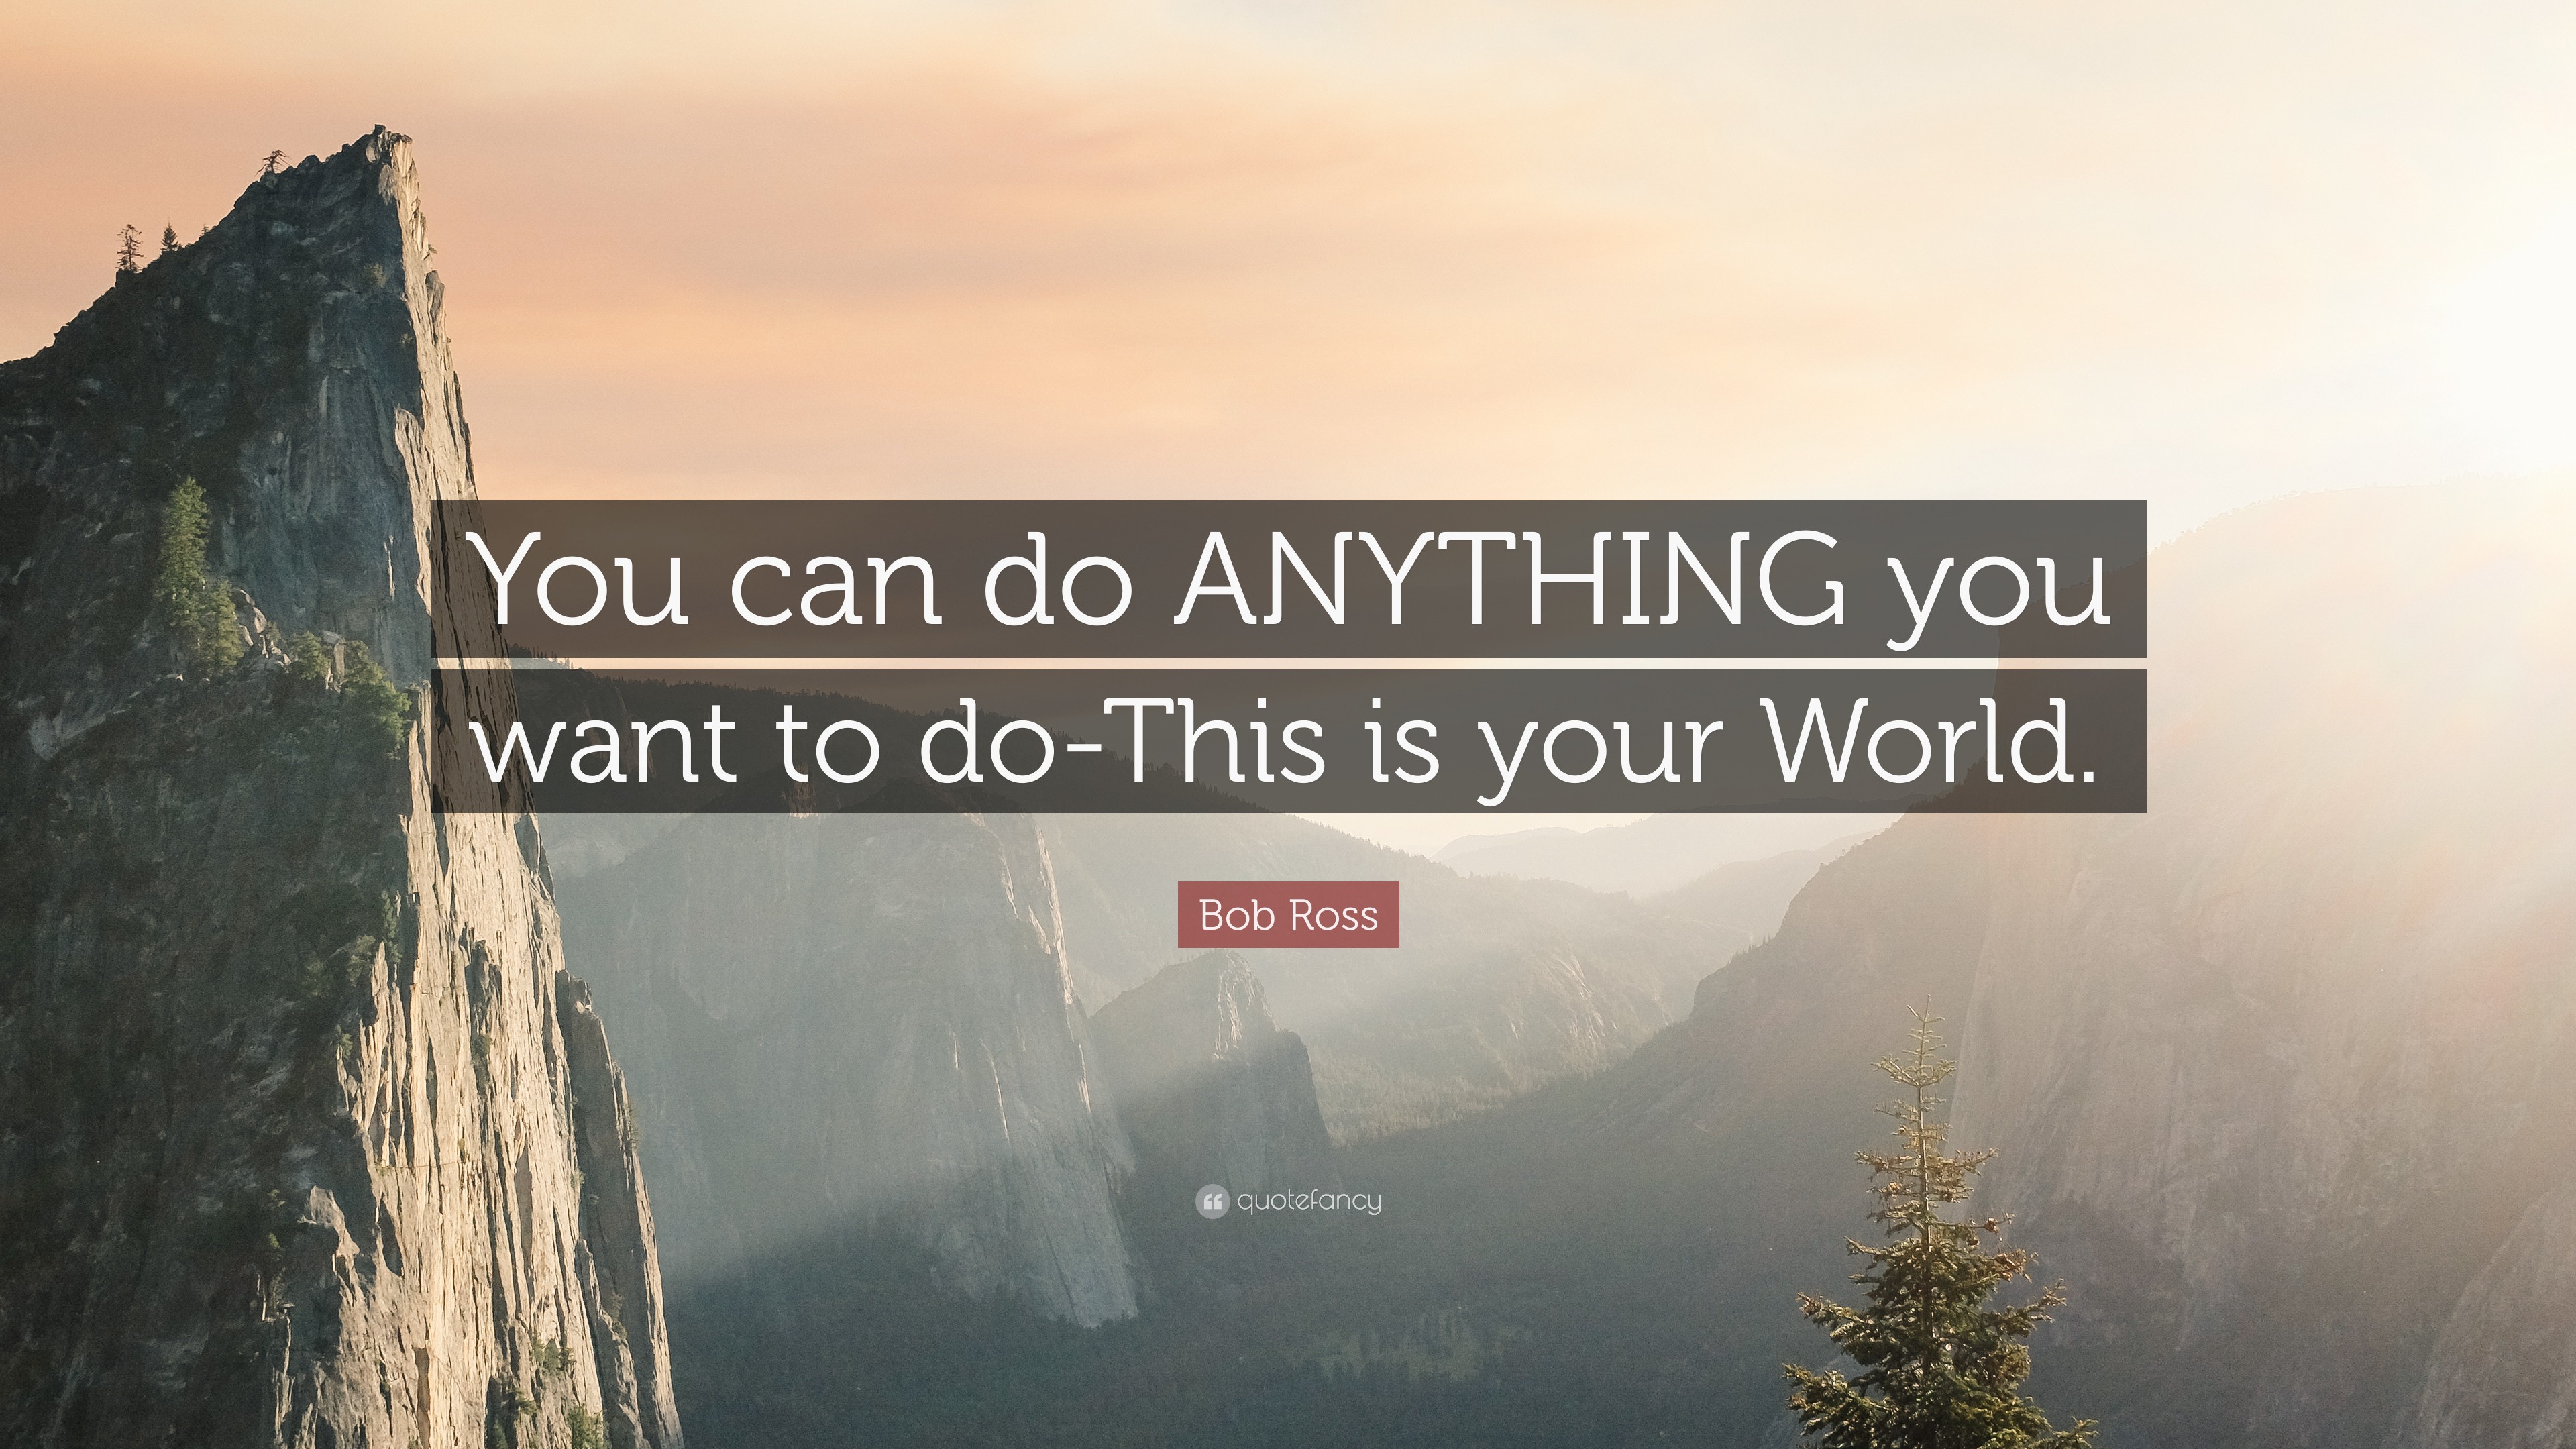 Bob Ross Quote: “You can do ANYTHING you want to do-This is your World.”